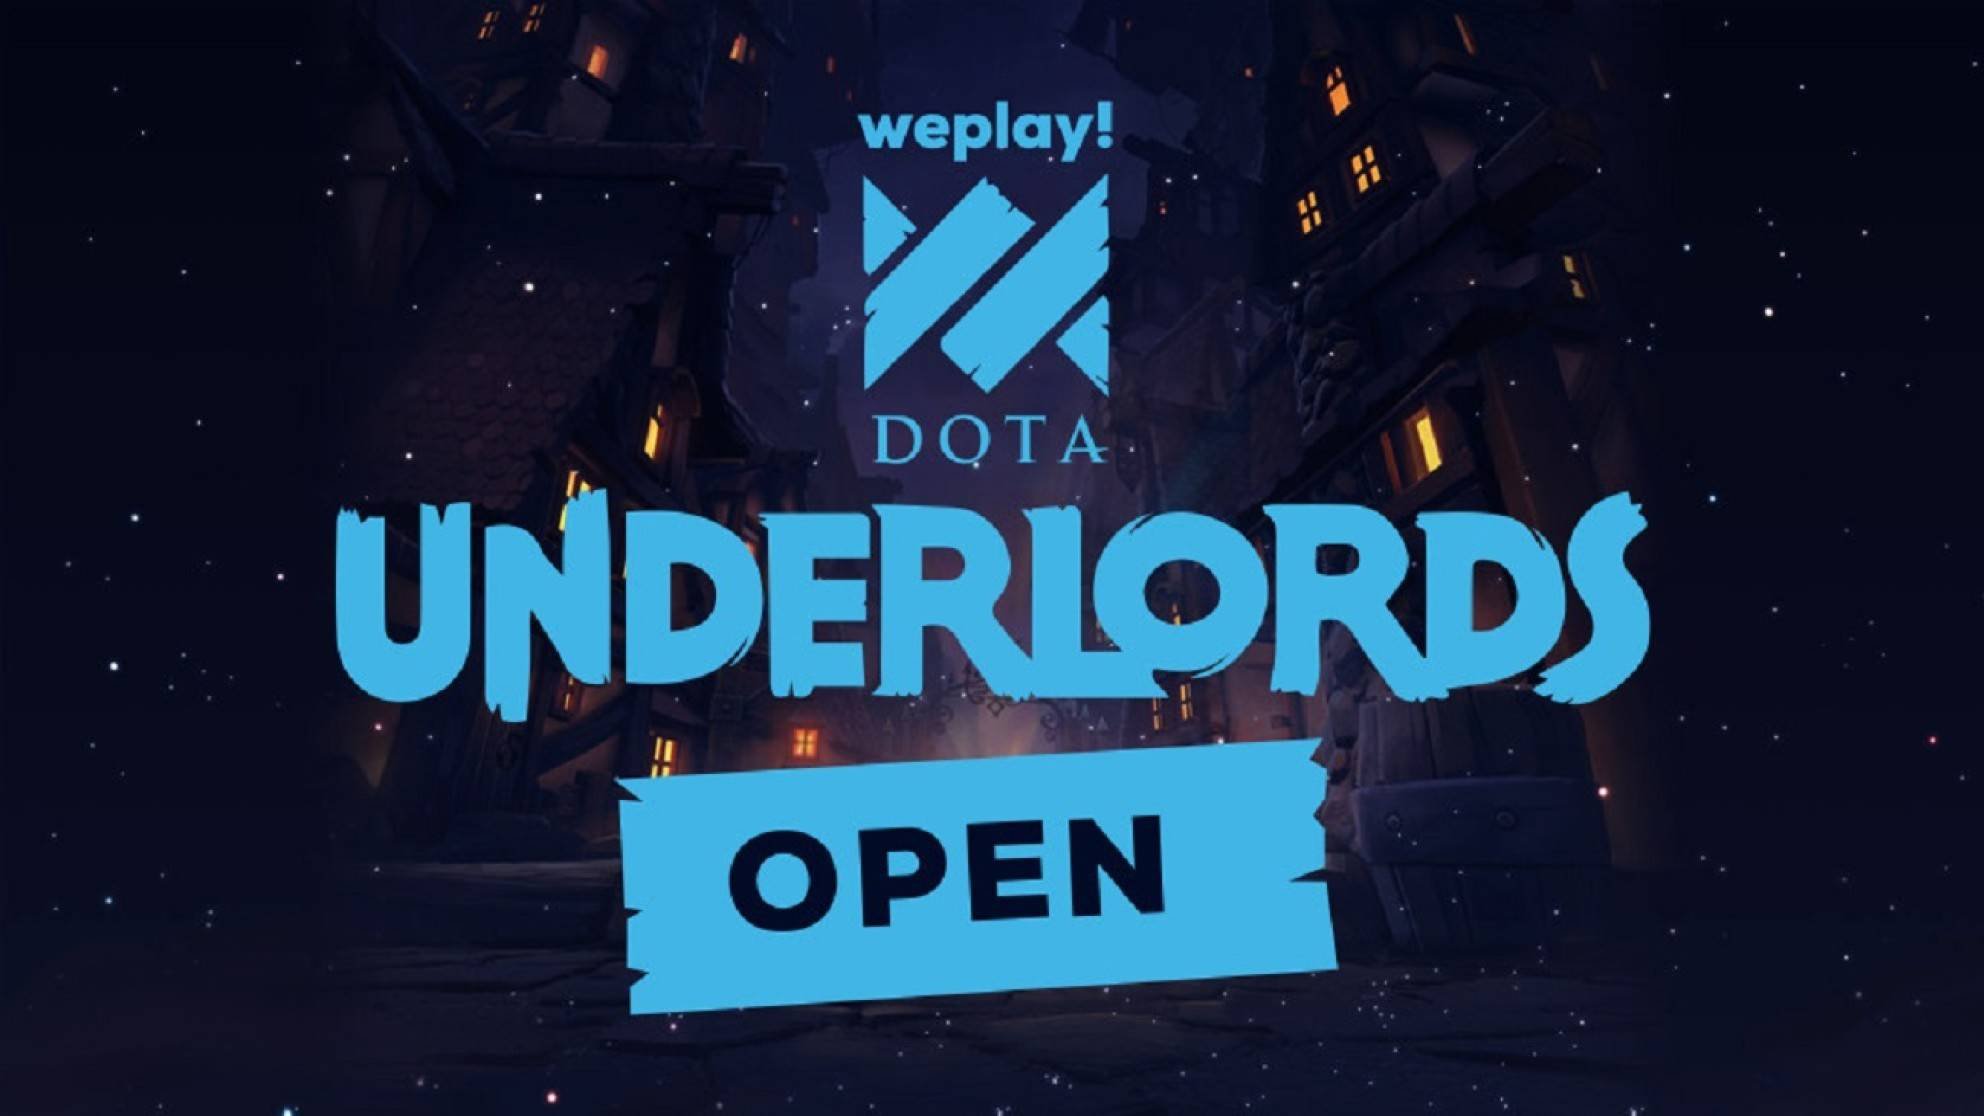 Autobattler Esportainment: WePlay! Esports announces its first open Dota Underlords tournament with a $15,000 prize pool